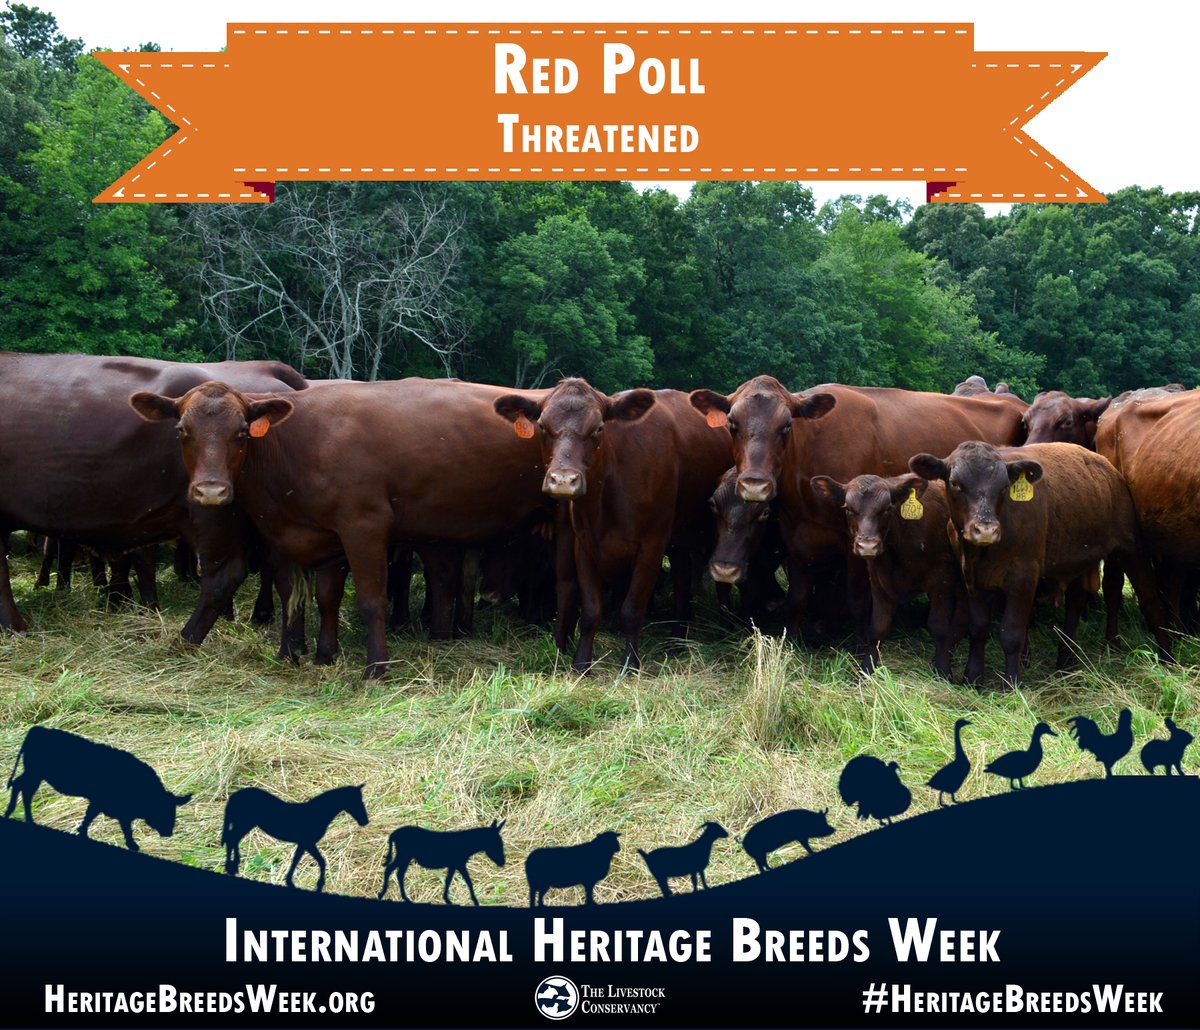 Red Poll cattle - Threatened: Red Polls have quiet dispositions and they are an excellent choice for rotational grazing. Learn more here: bit.ly/RedPollCattle #HeritageBreedsWeek #cattle #redpoll #cows #beef #dairy #norfolk #suffolk #grassfed #grassfinished